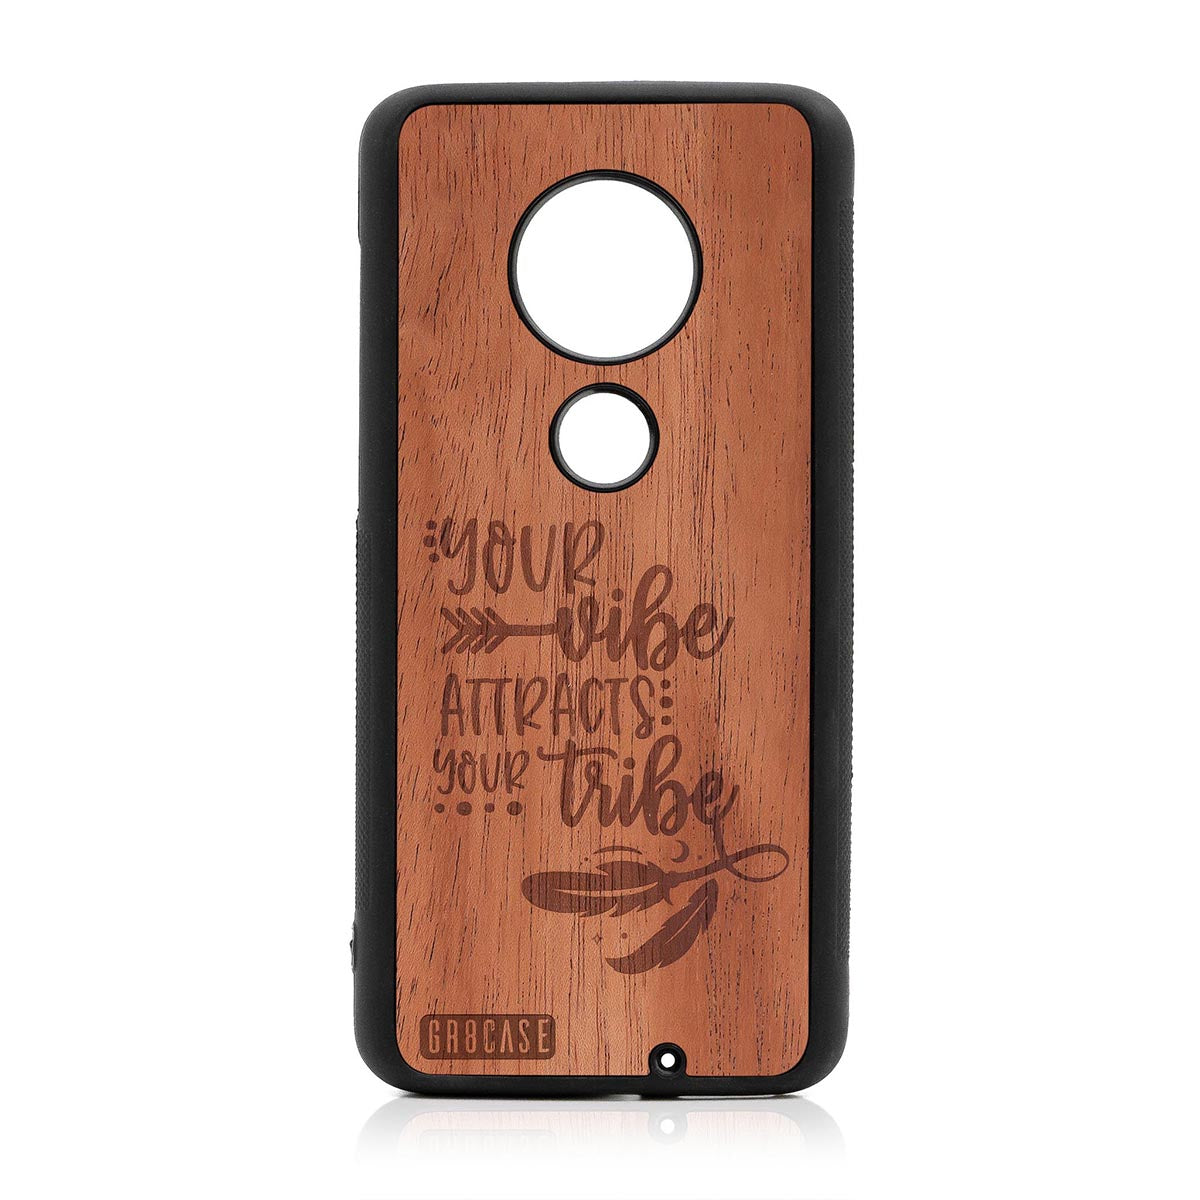 Your Vibe Attracts Your Tribe Design Wood Case Moto G7 Plus